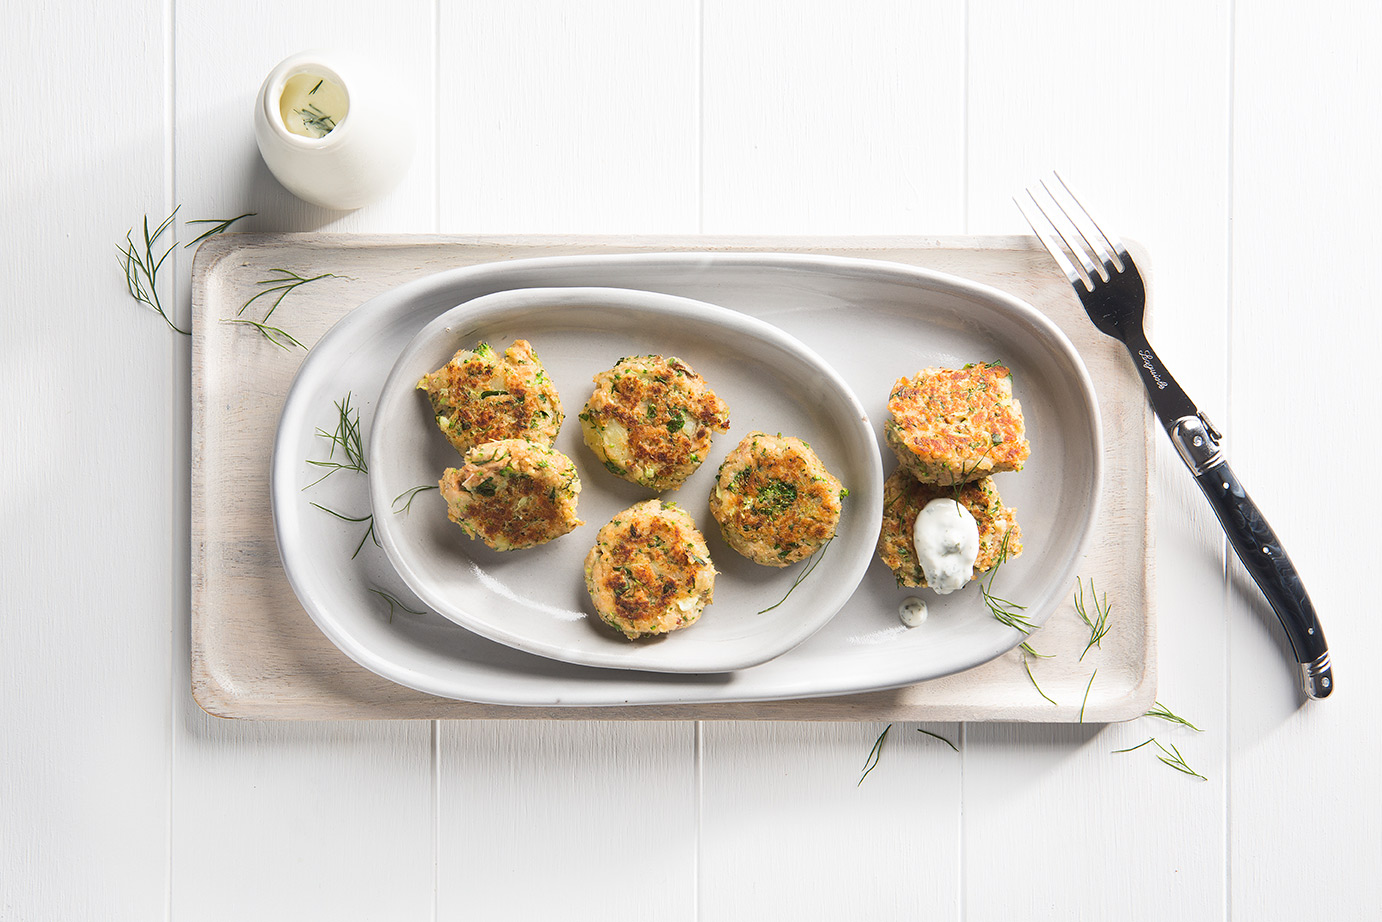 Image of six salmon and potato cakes shot from above on a large stone serving dish on a wooden cutting board with a spoonful of dipping sauce on the side